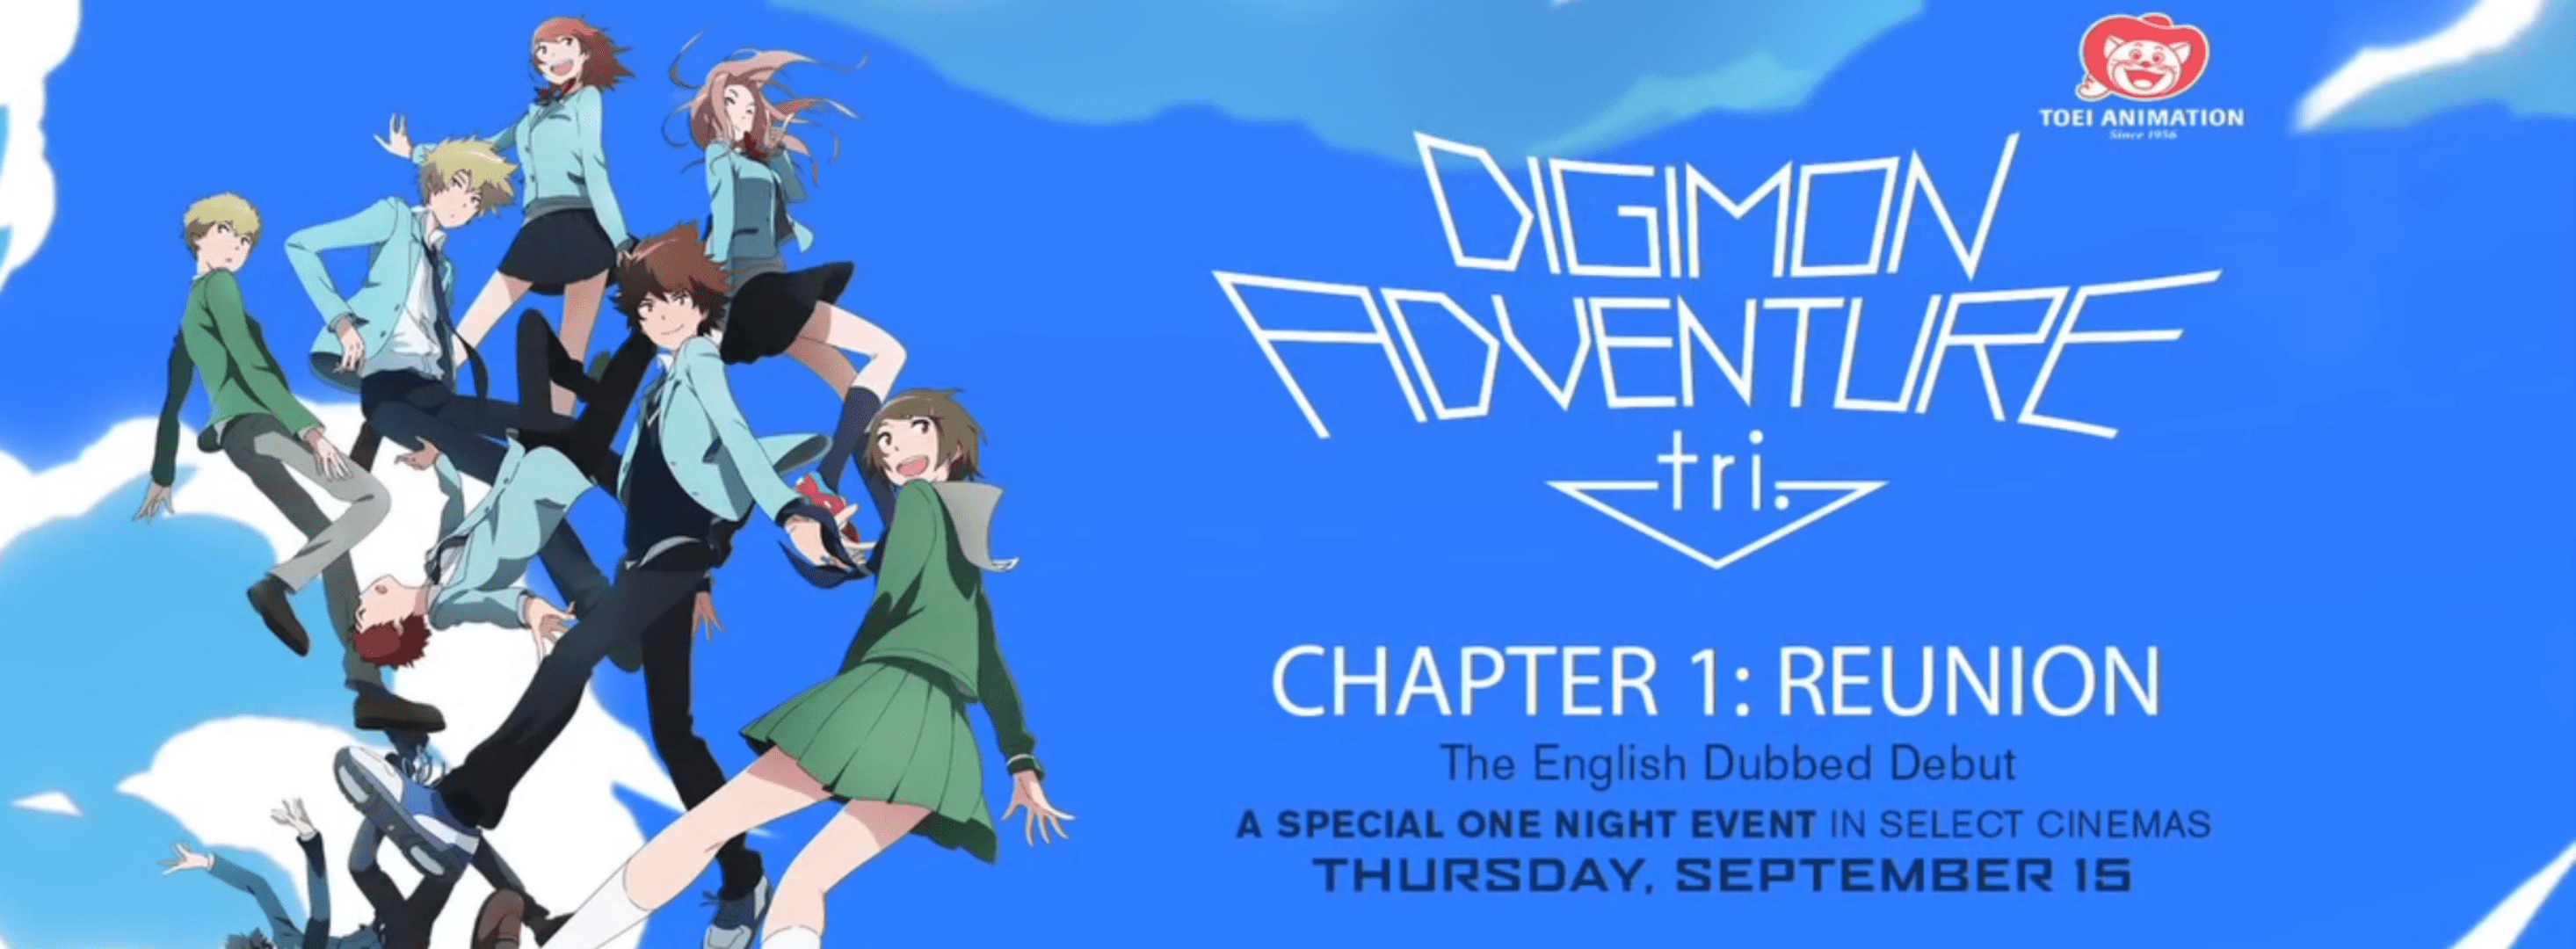 Digimon Adventure tri Coming Soon to Theaters Near You!